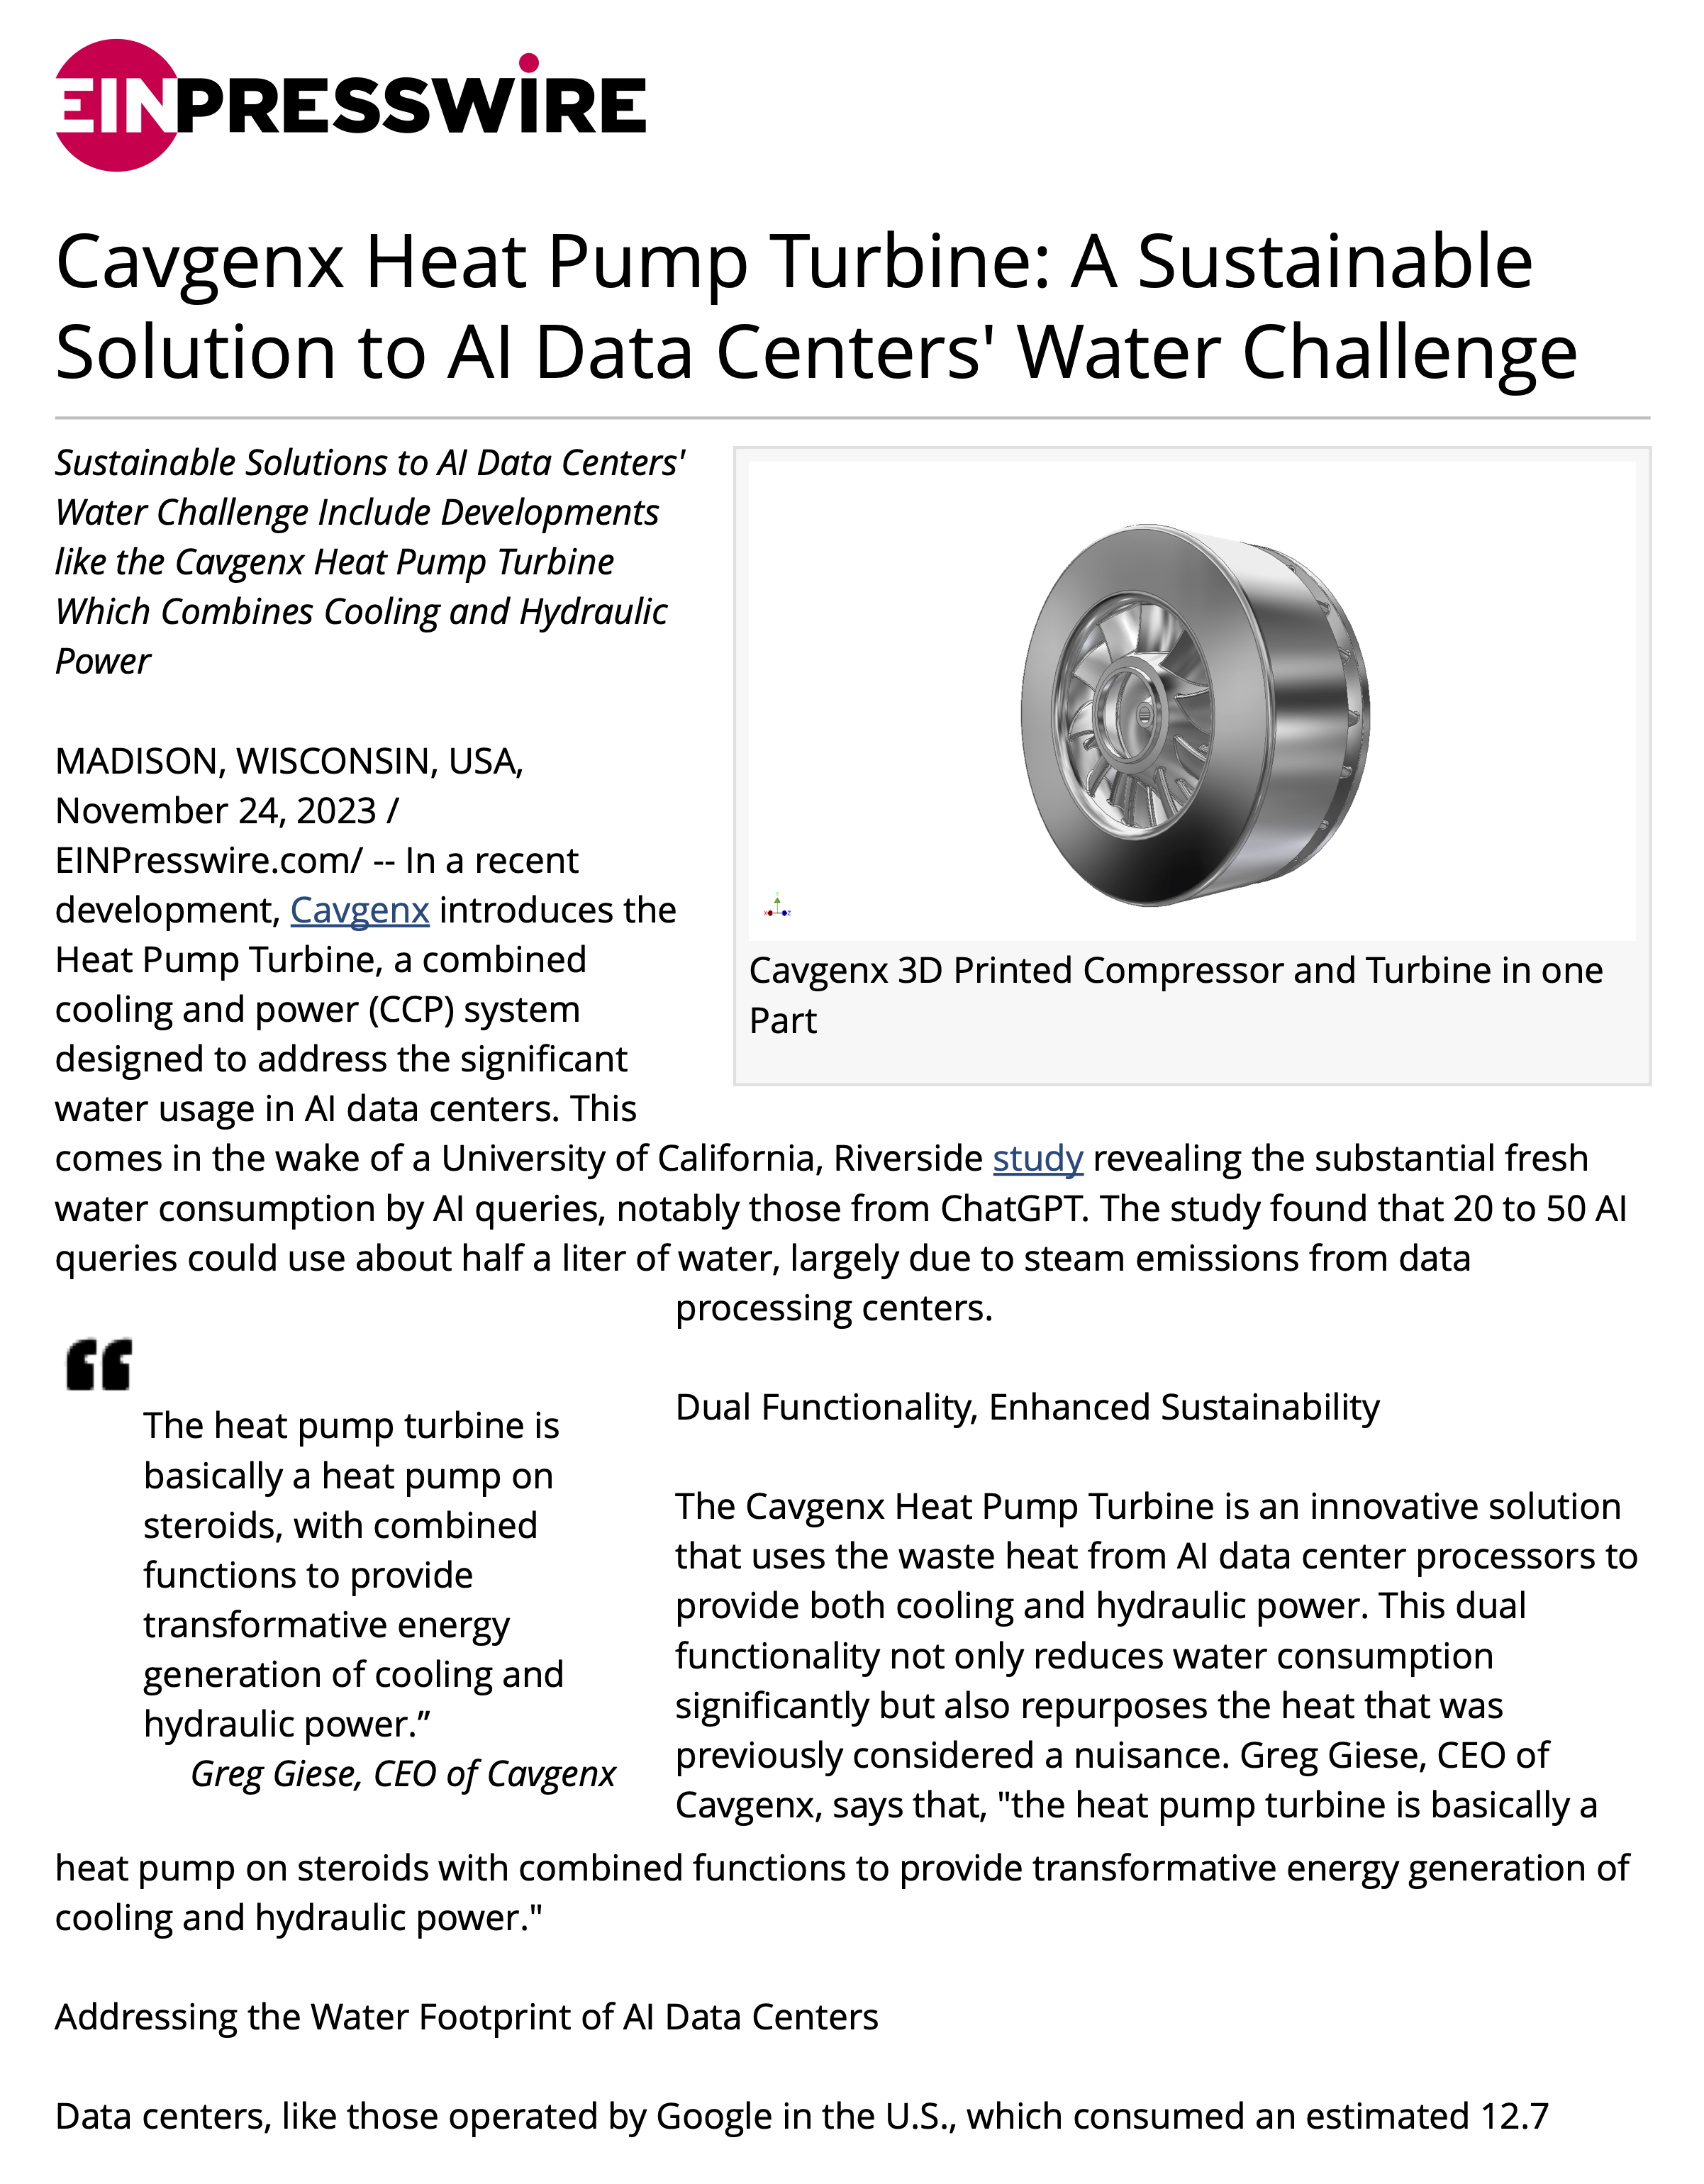 Cavgenx Heat Pump Turbine: A Sustainable Solution to AI Data Centers Water Challenge